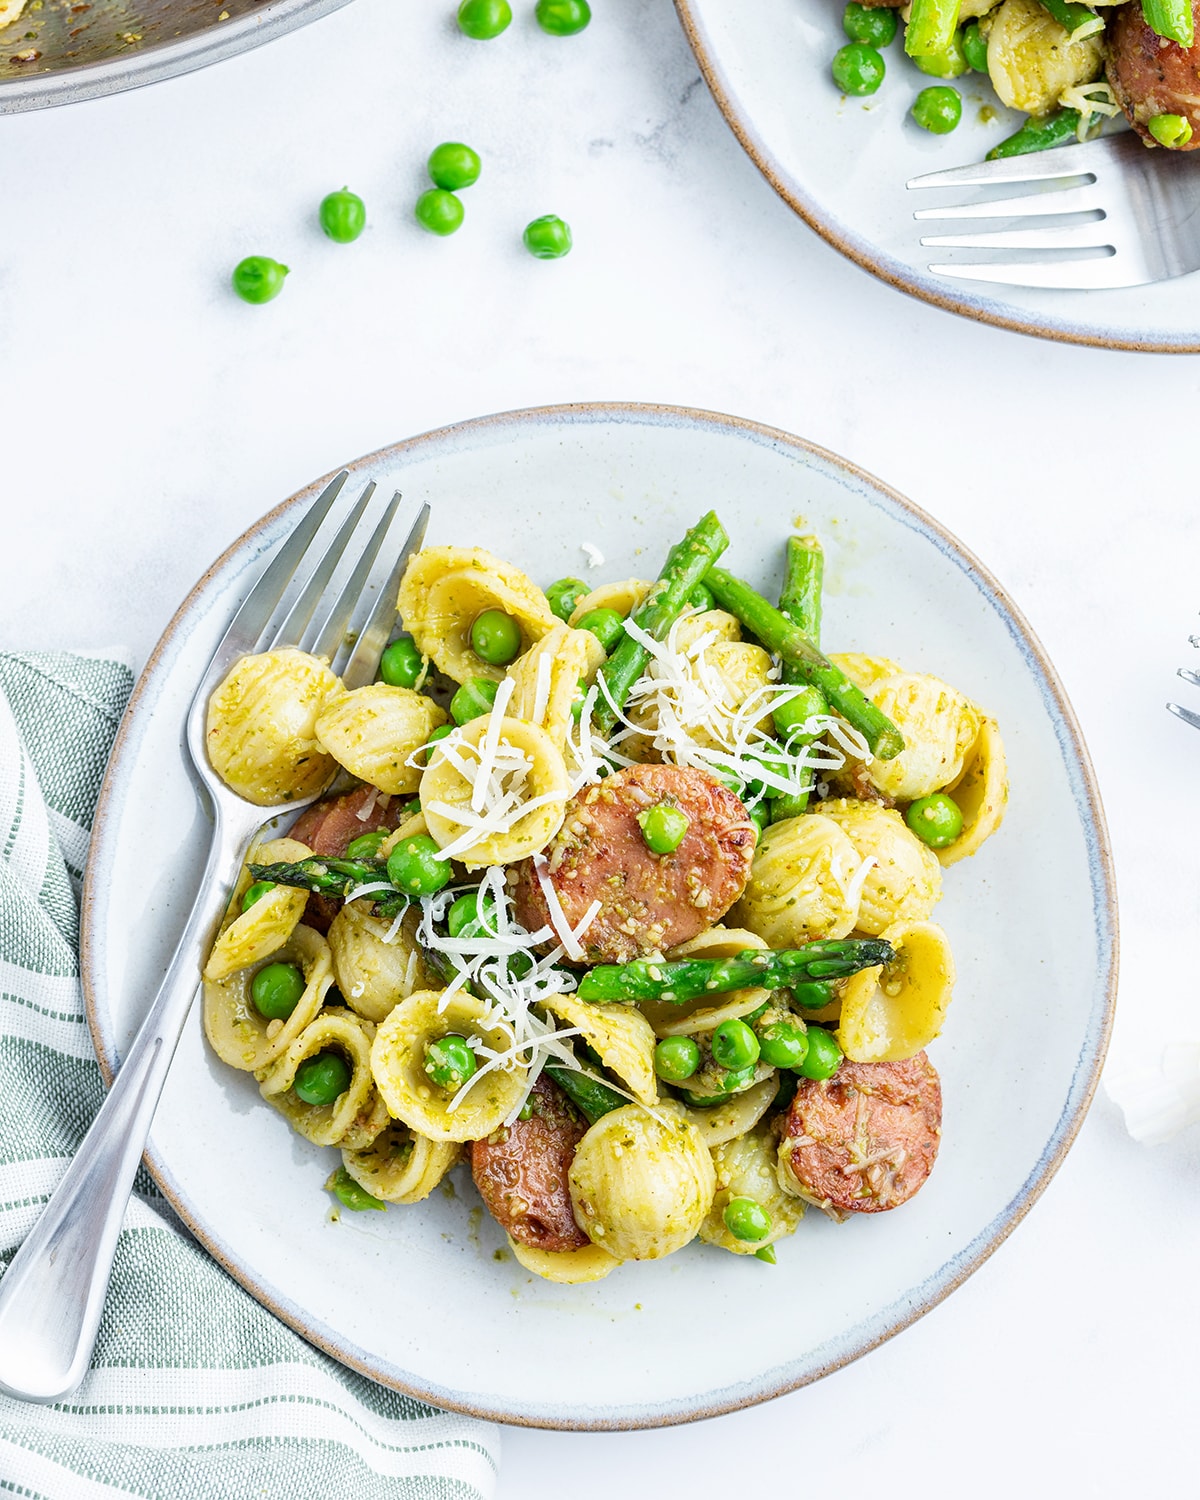 An overhead photo of a plate or asparagus, chicken, and orecchiette pasta.